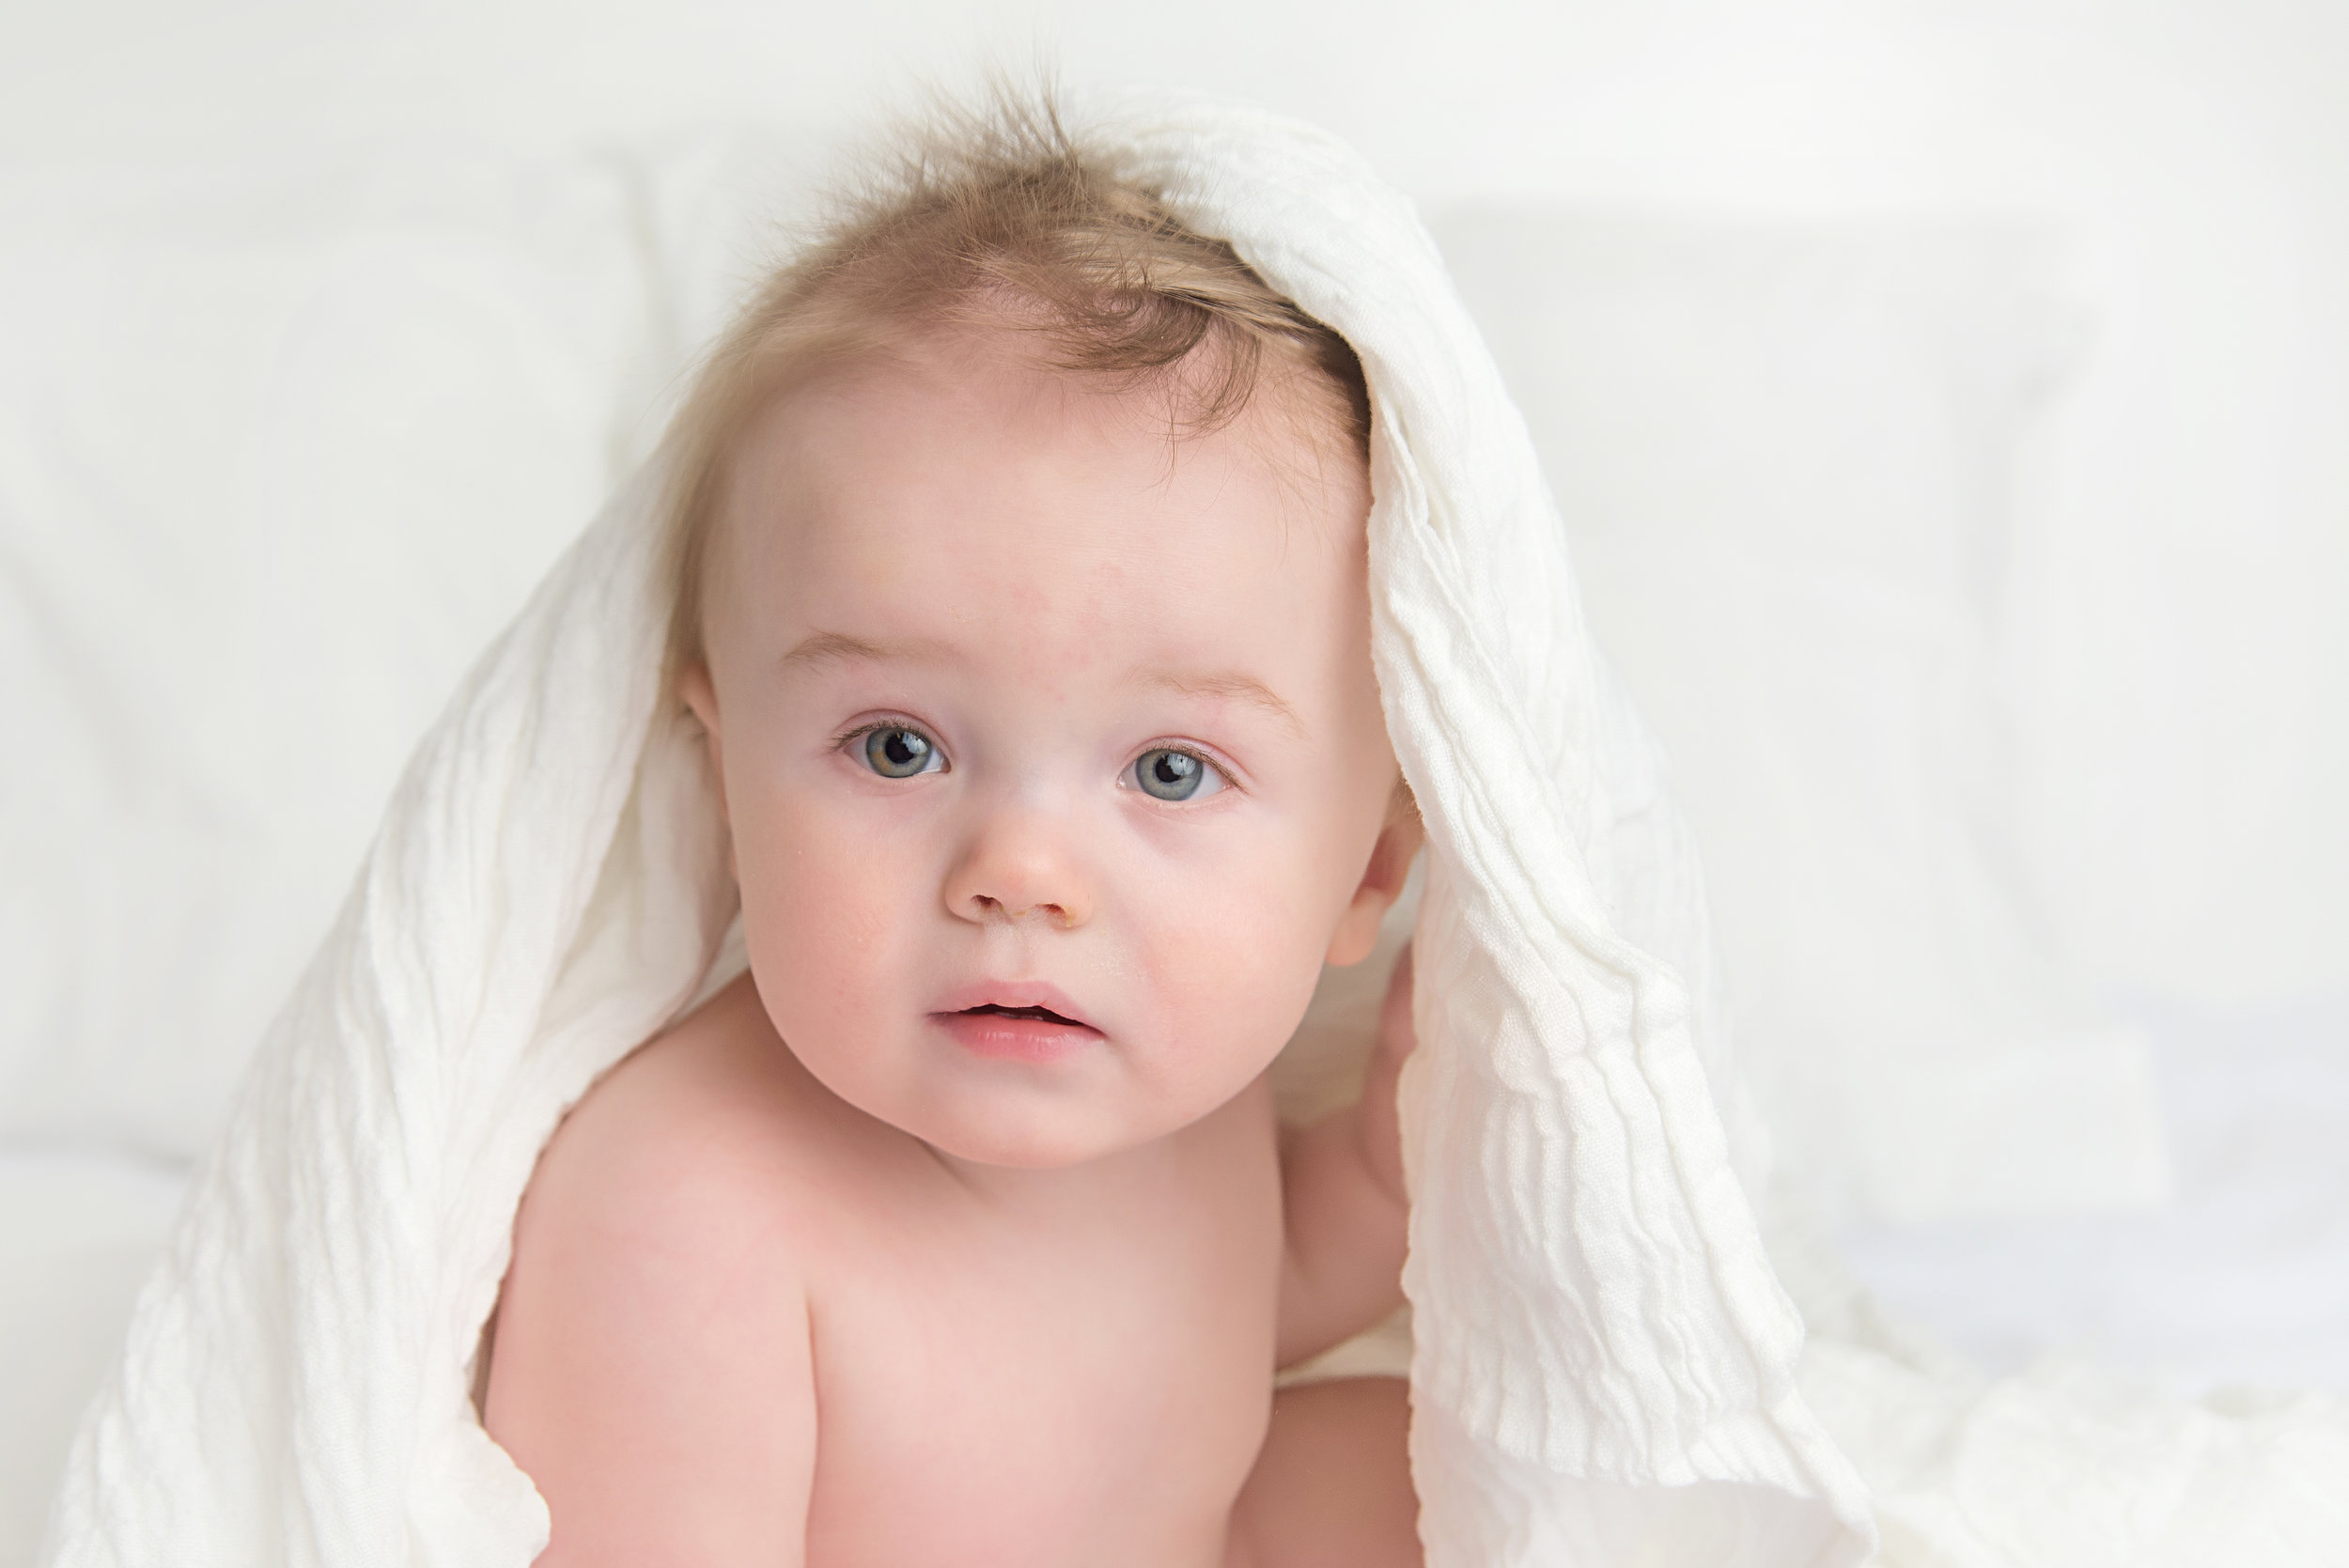 st-louis-baby-photographer-milestone-session-boy-on-white-bed-with-white-blanket-on-his-head.jpg